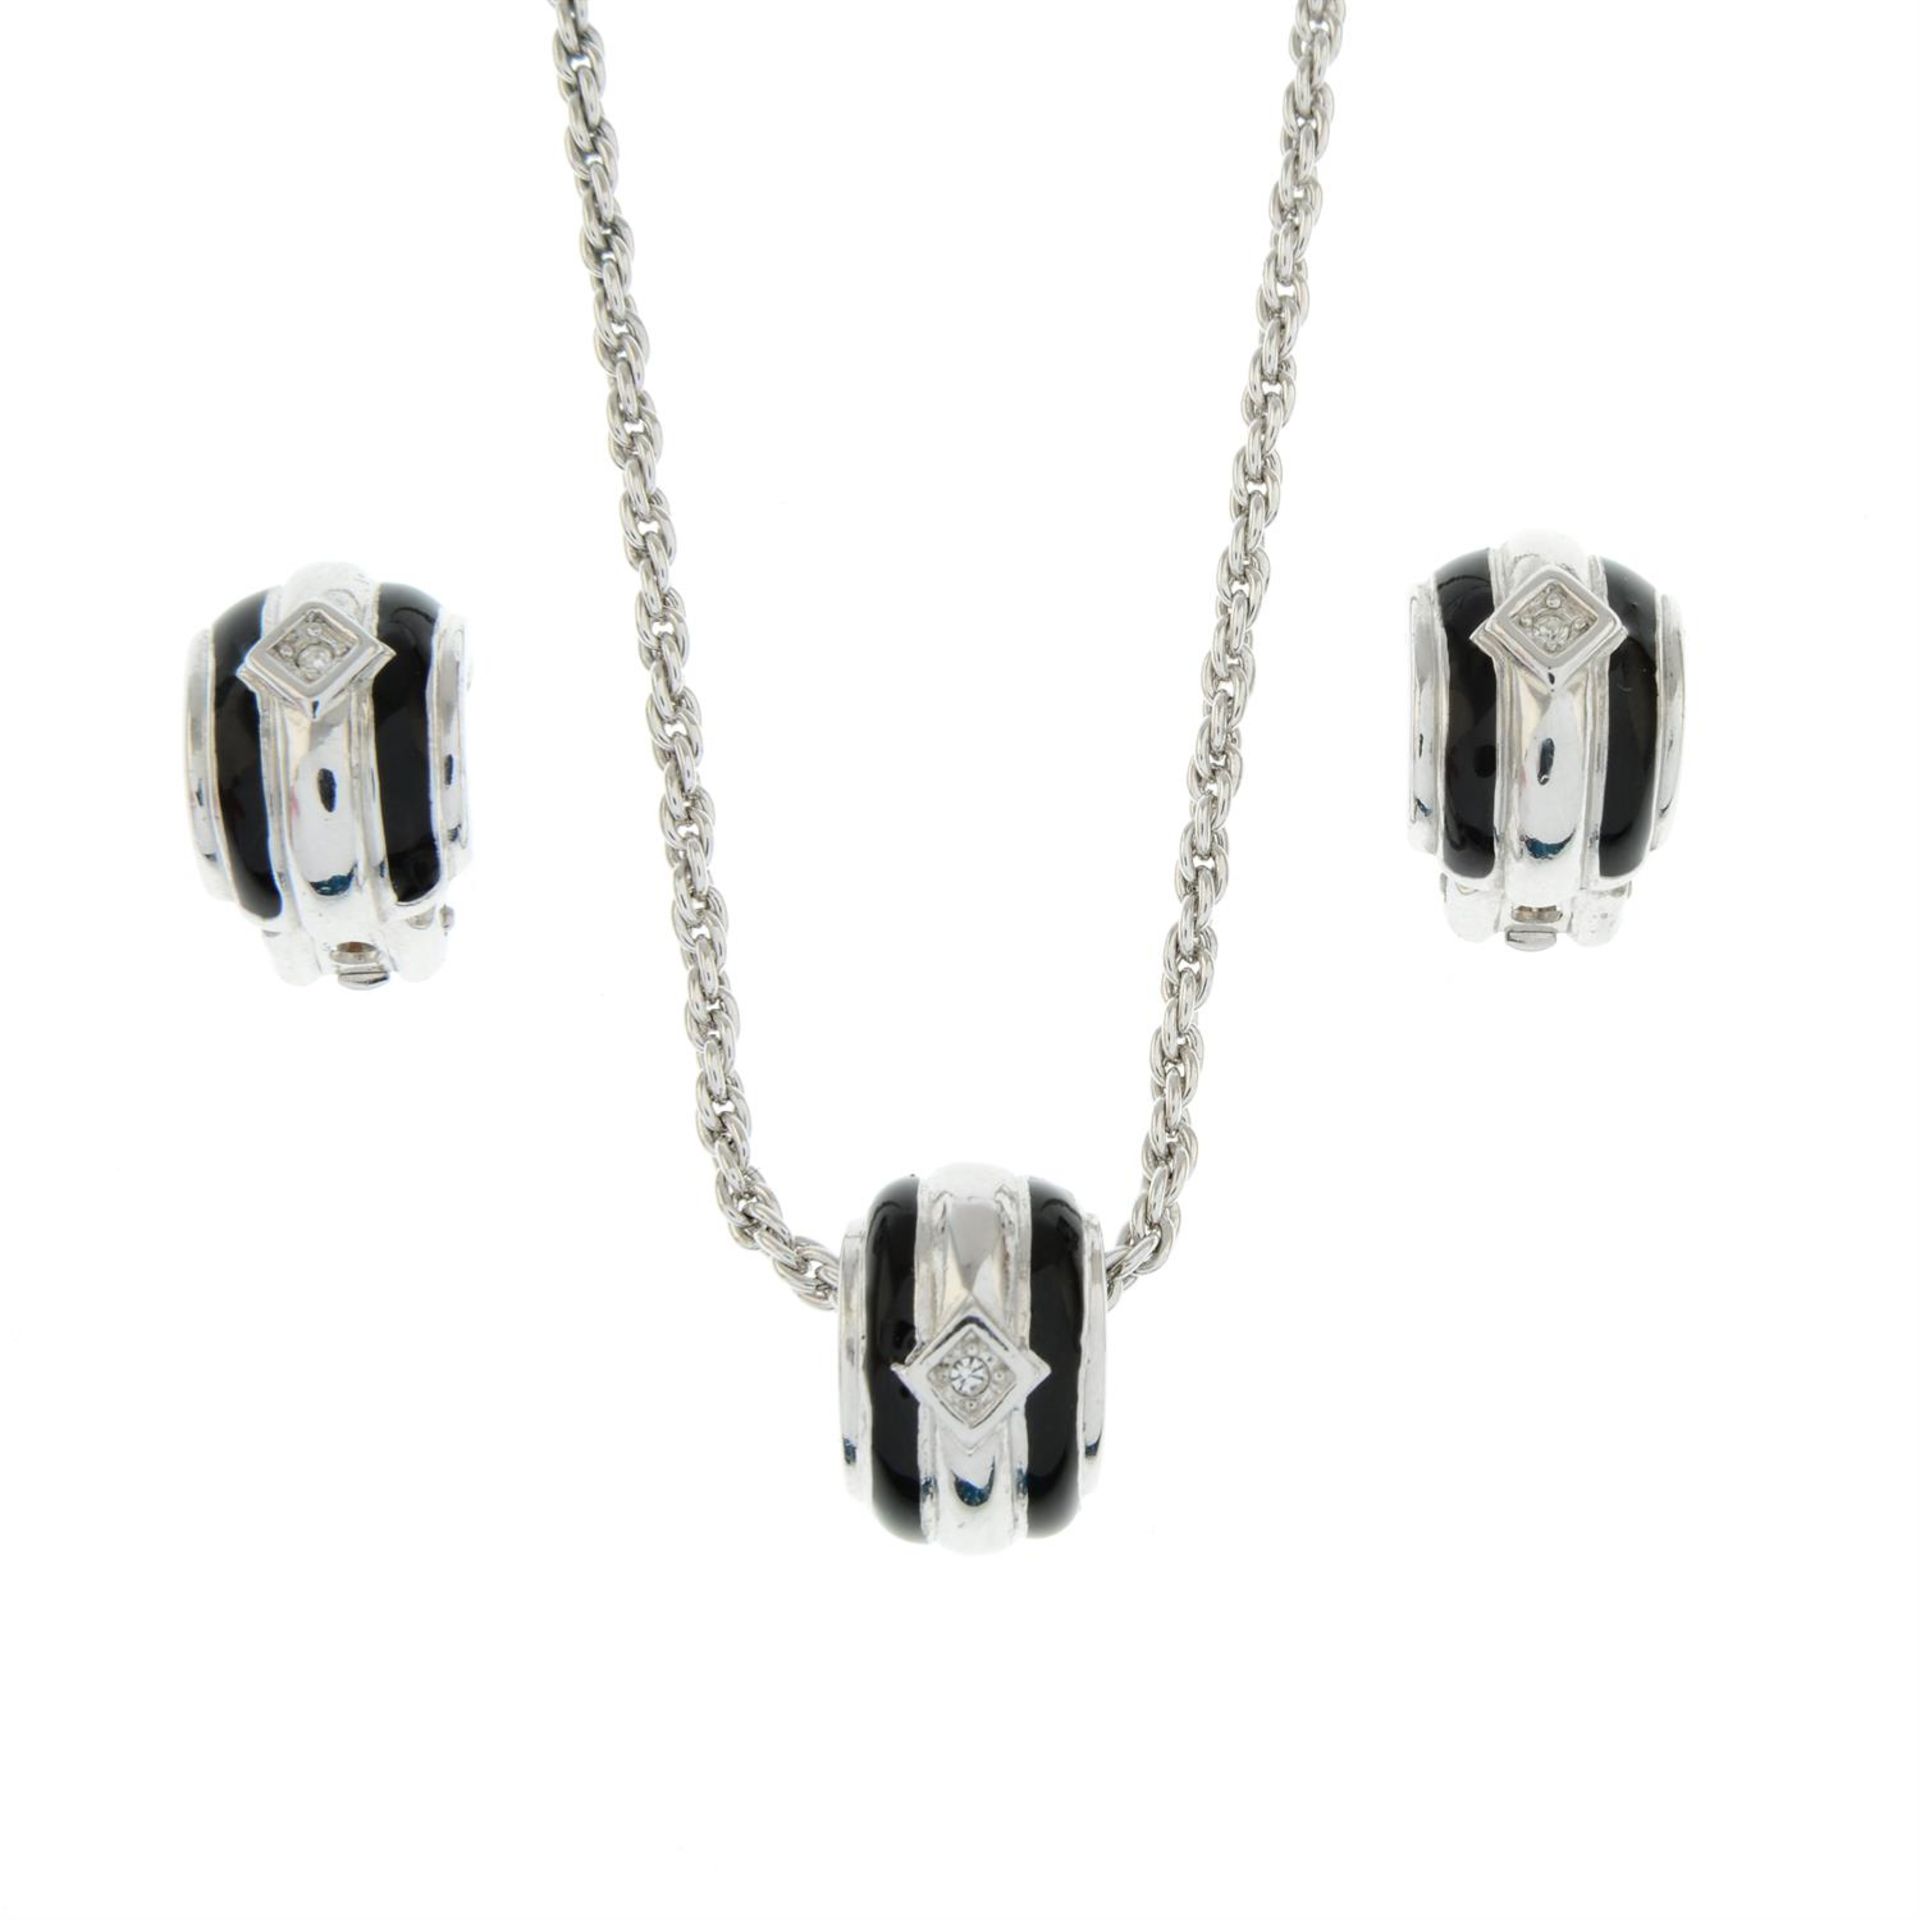 CHRISTIAN DIOR - a black enamel and paste set pendant necklace with matching earrings.